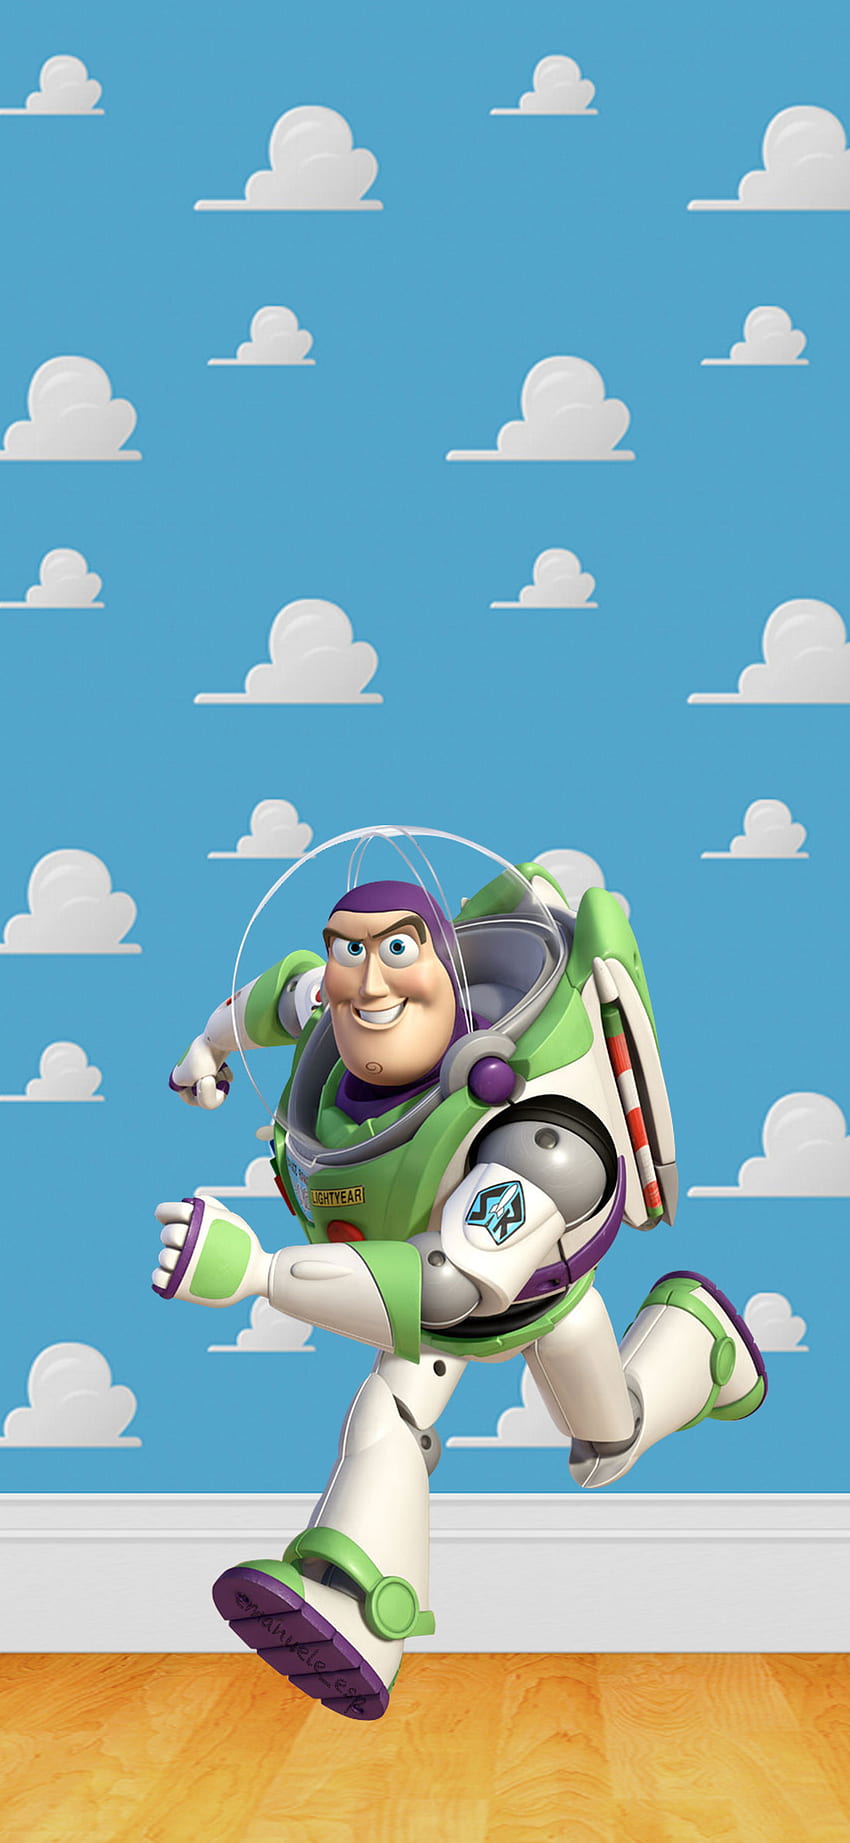 30 Lightyear HD Wallpapers and Backgrounds